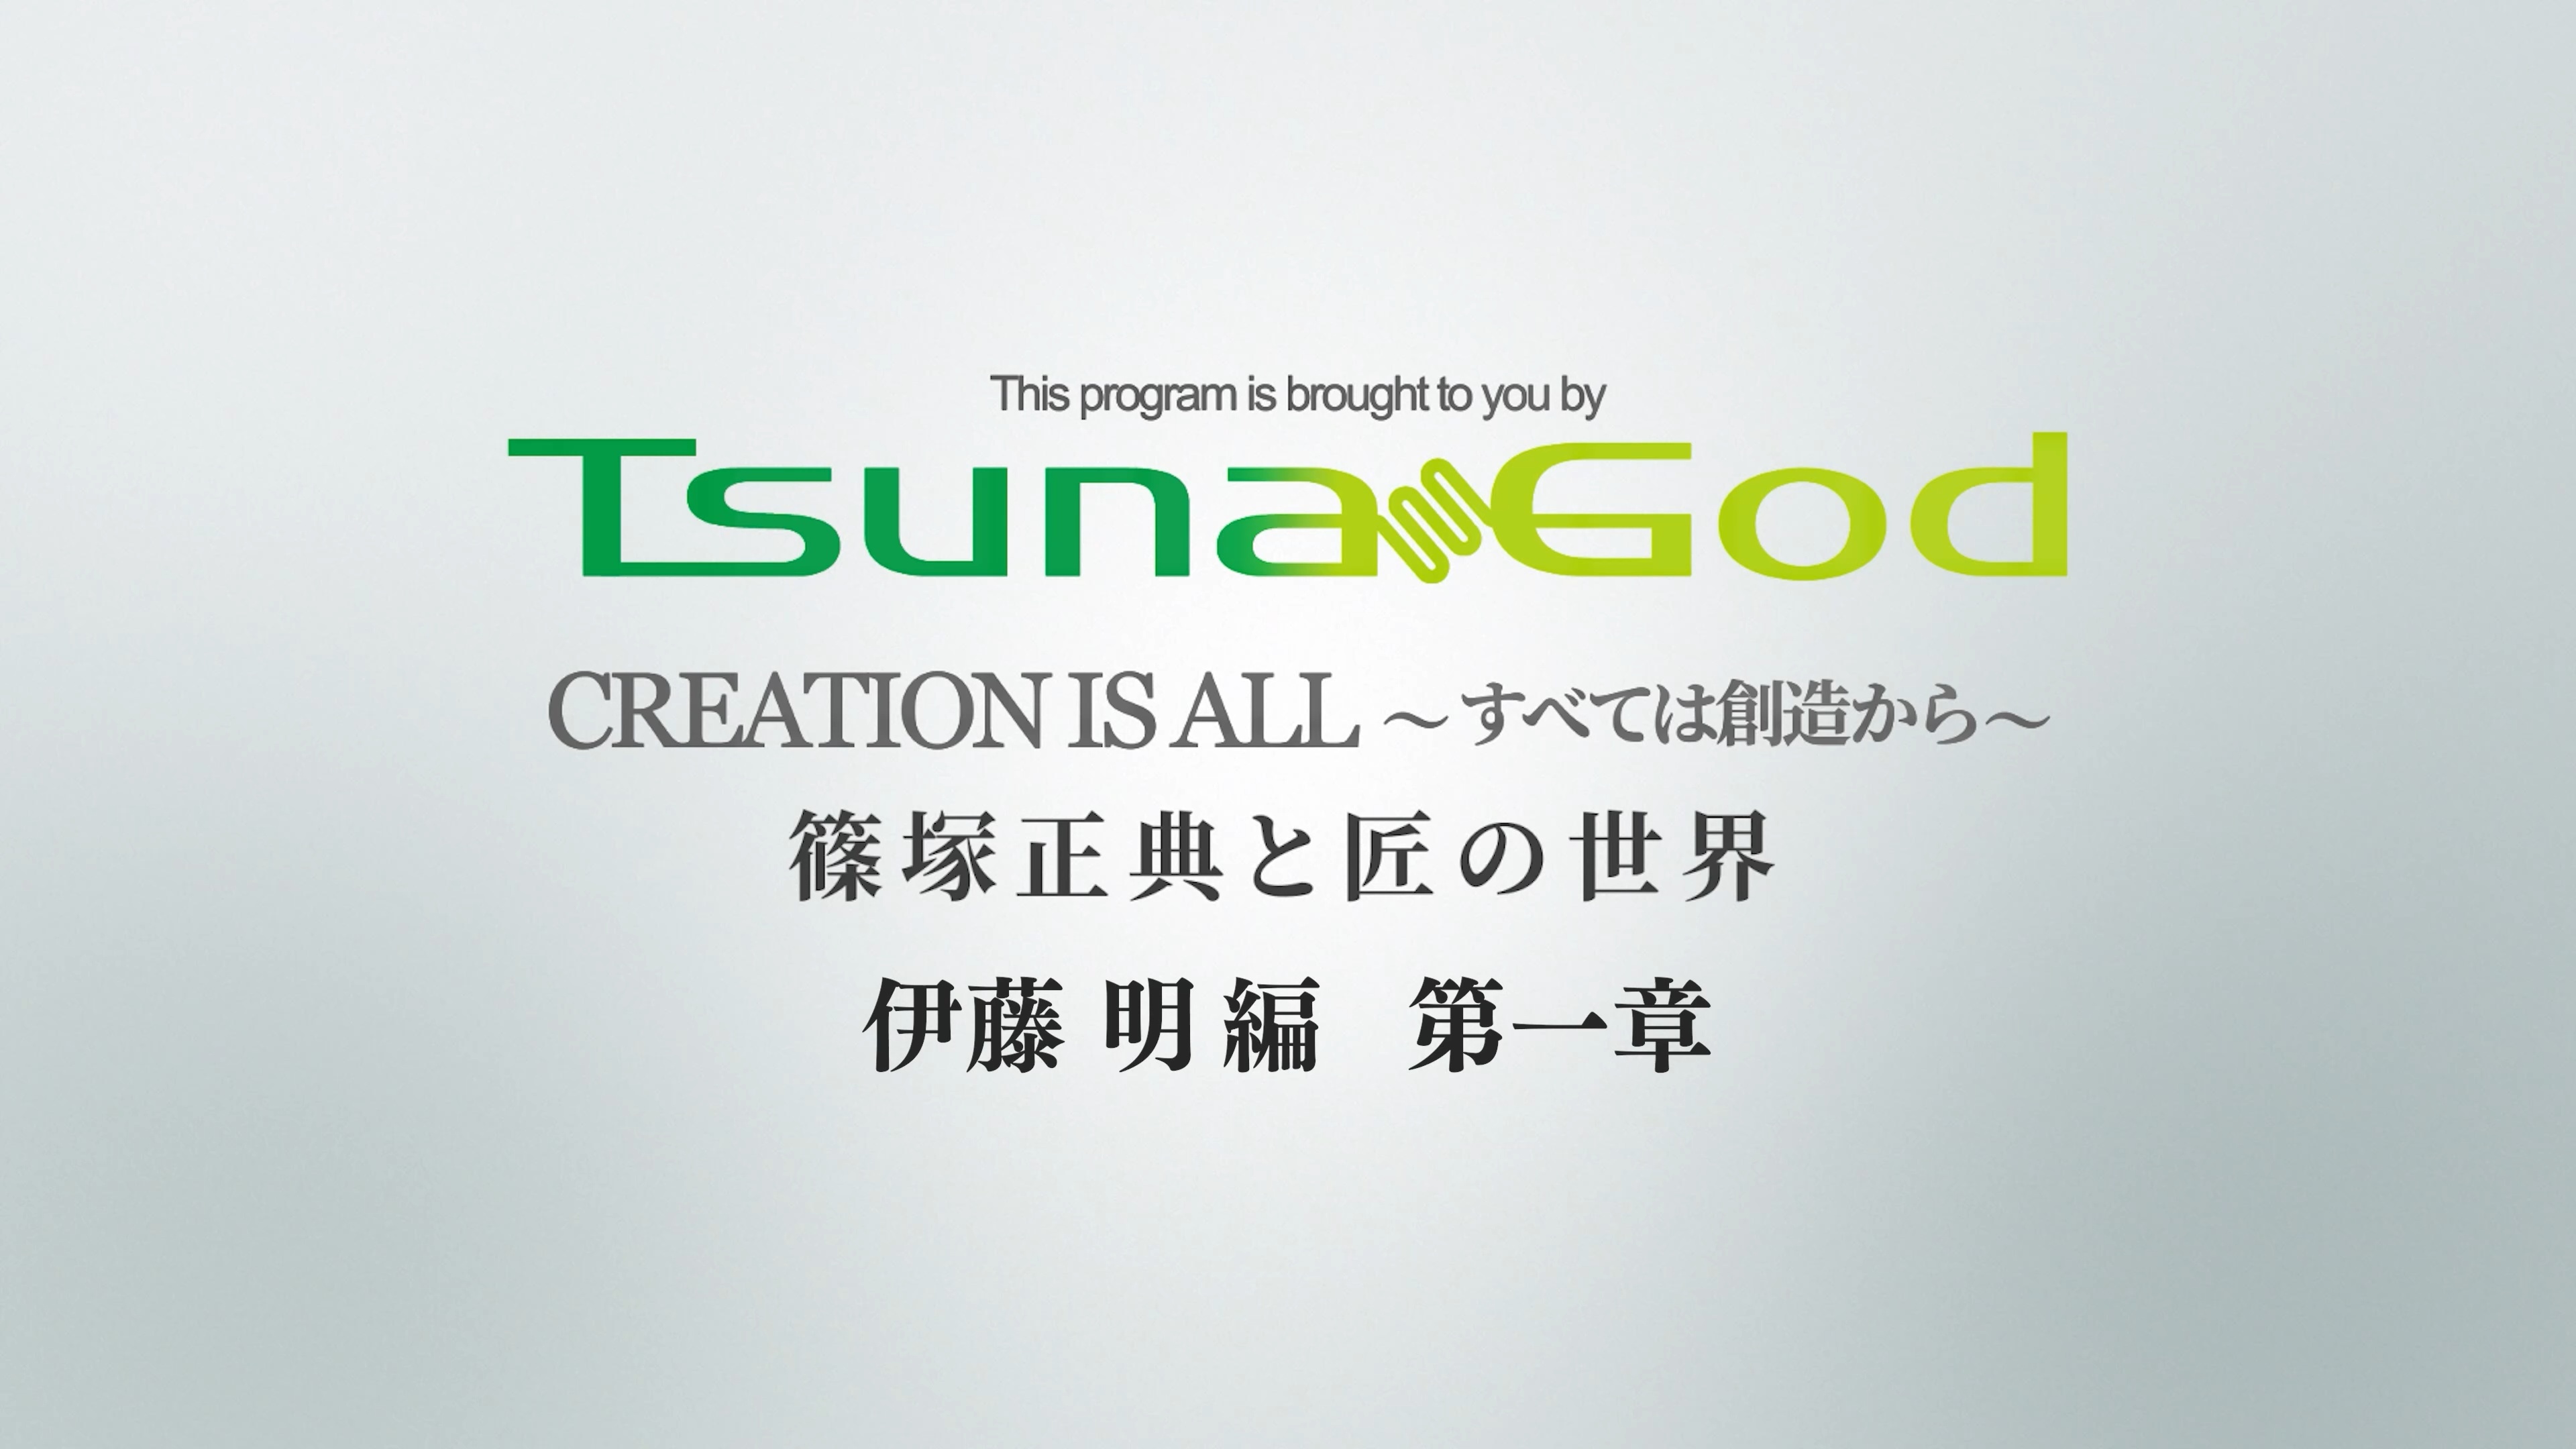 CREATION IS ALL すべては創造から 篠塚正典と匠の世界 伊藤 明 編 第一章